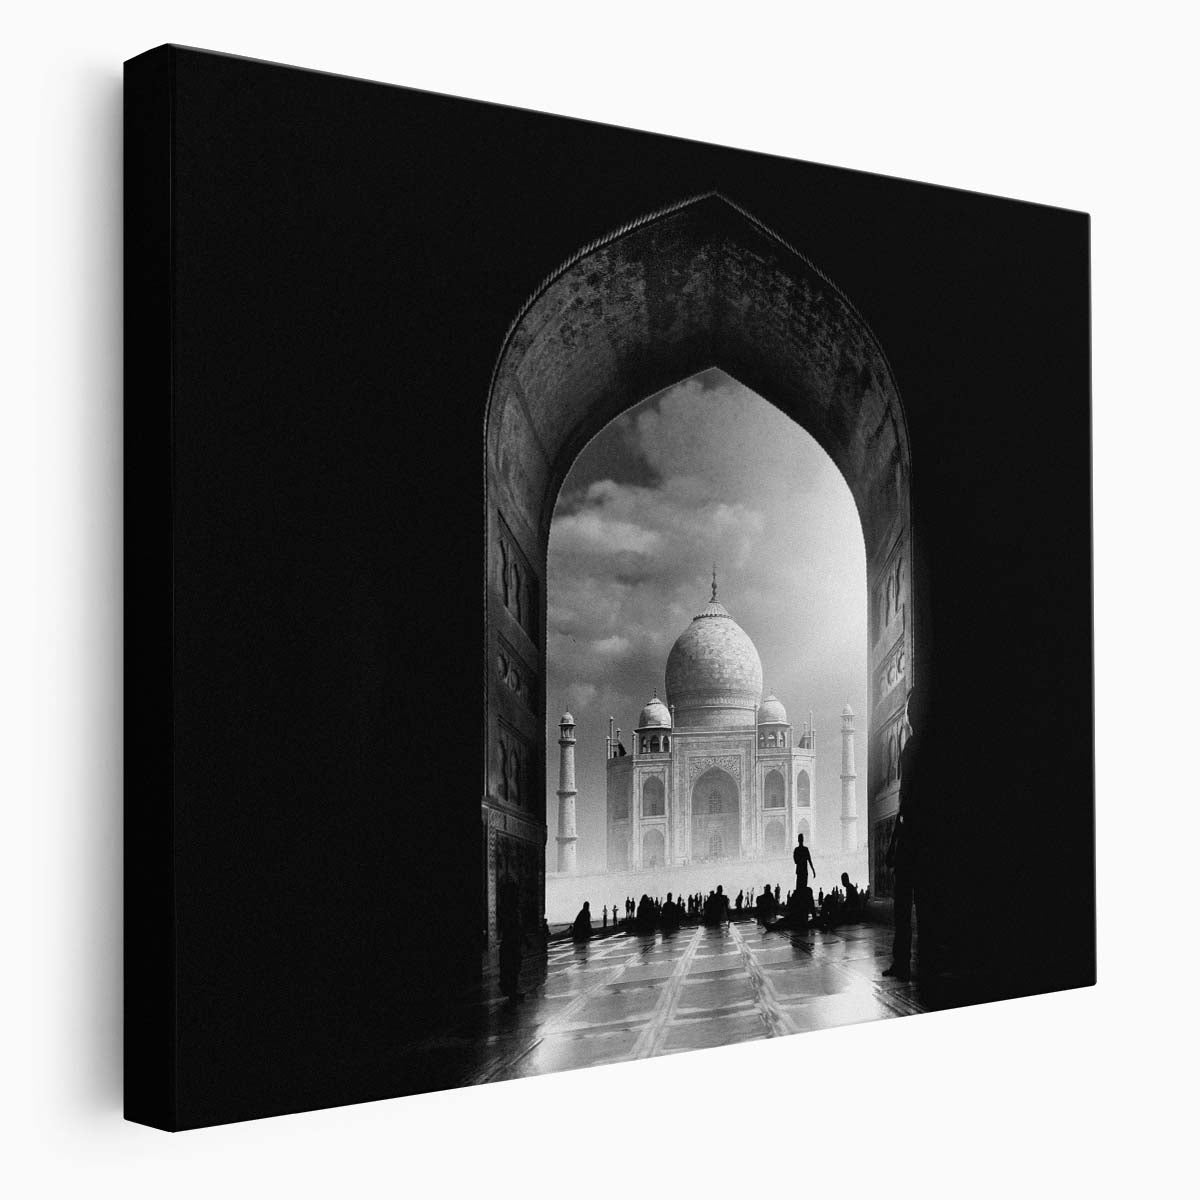 Taj Mahal Iconic Monochrome Architecture Wall Art by Luxuriance Designs. Made in USA.